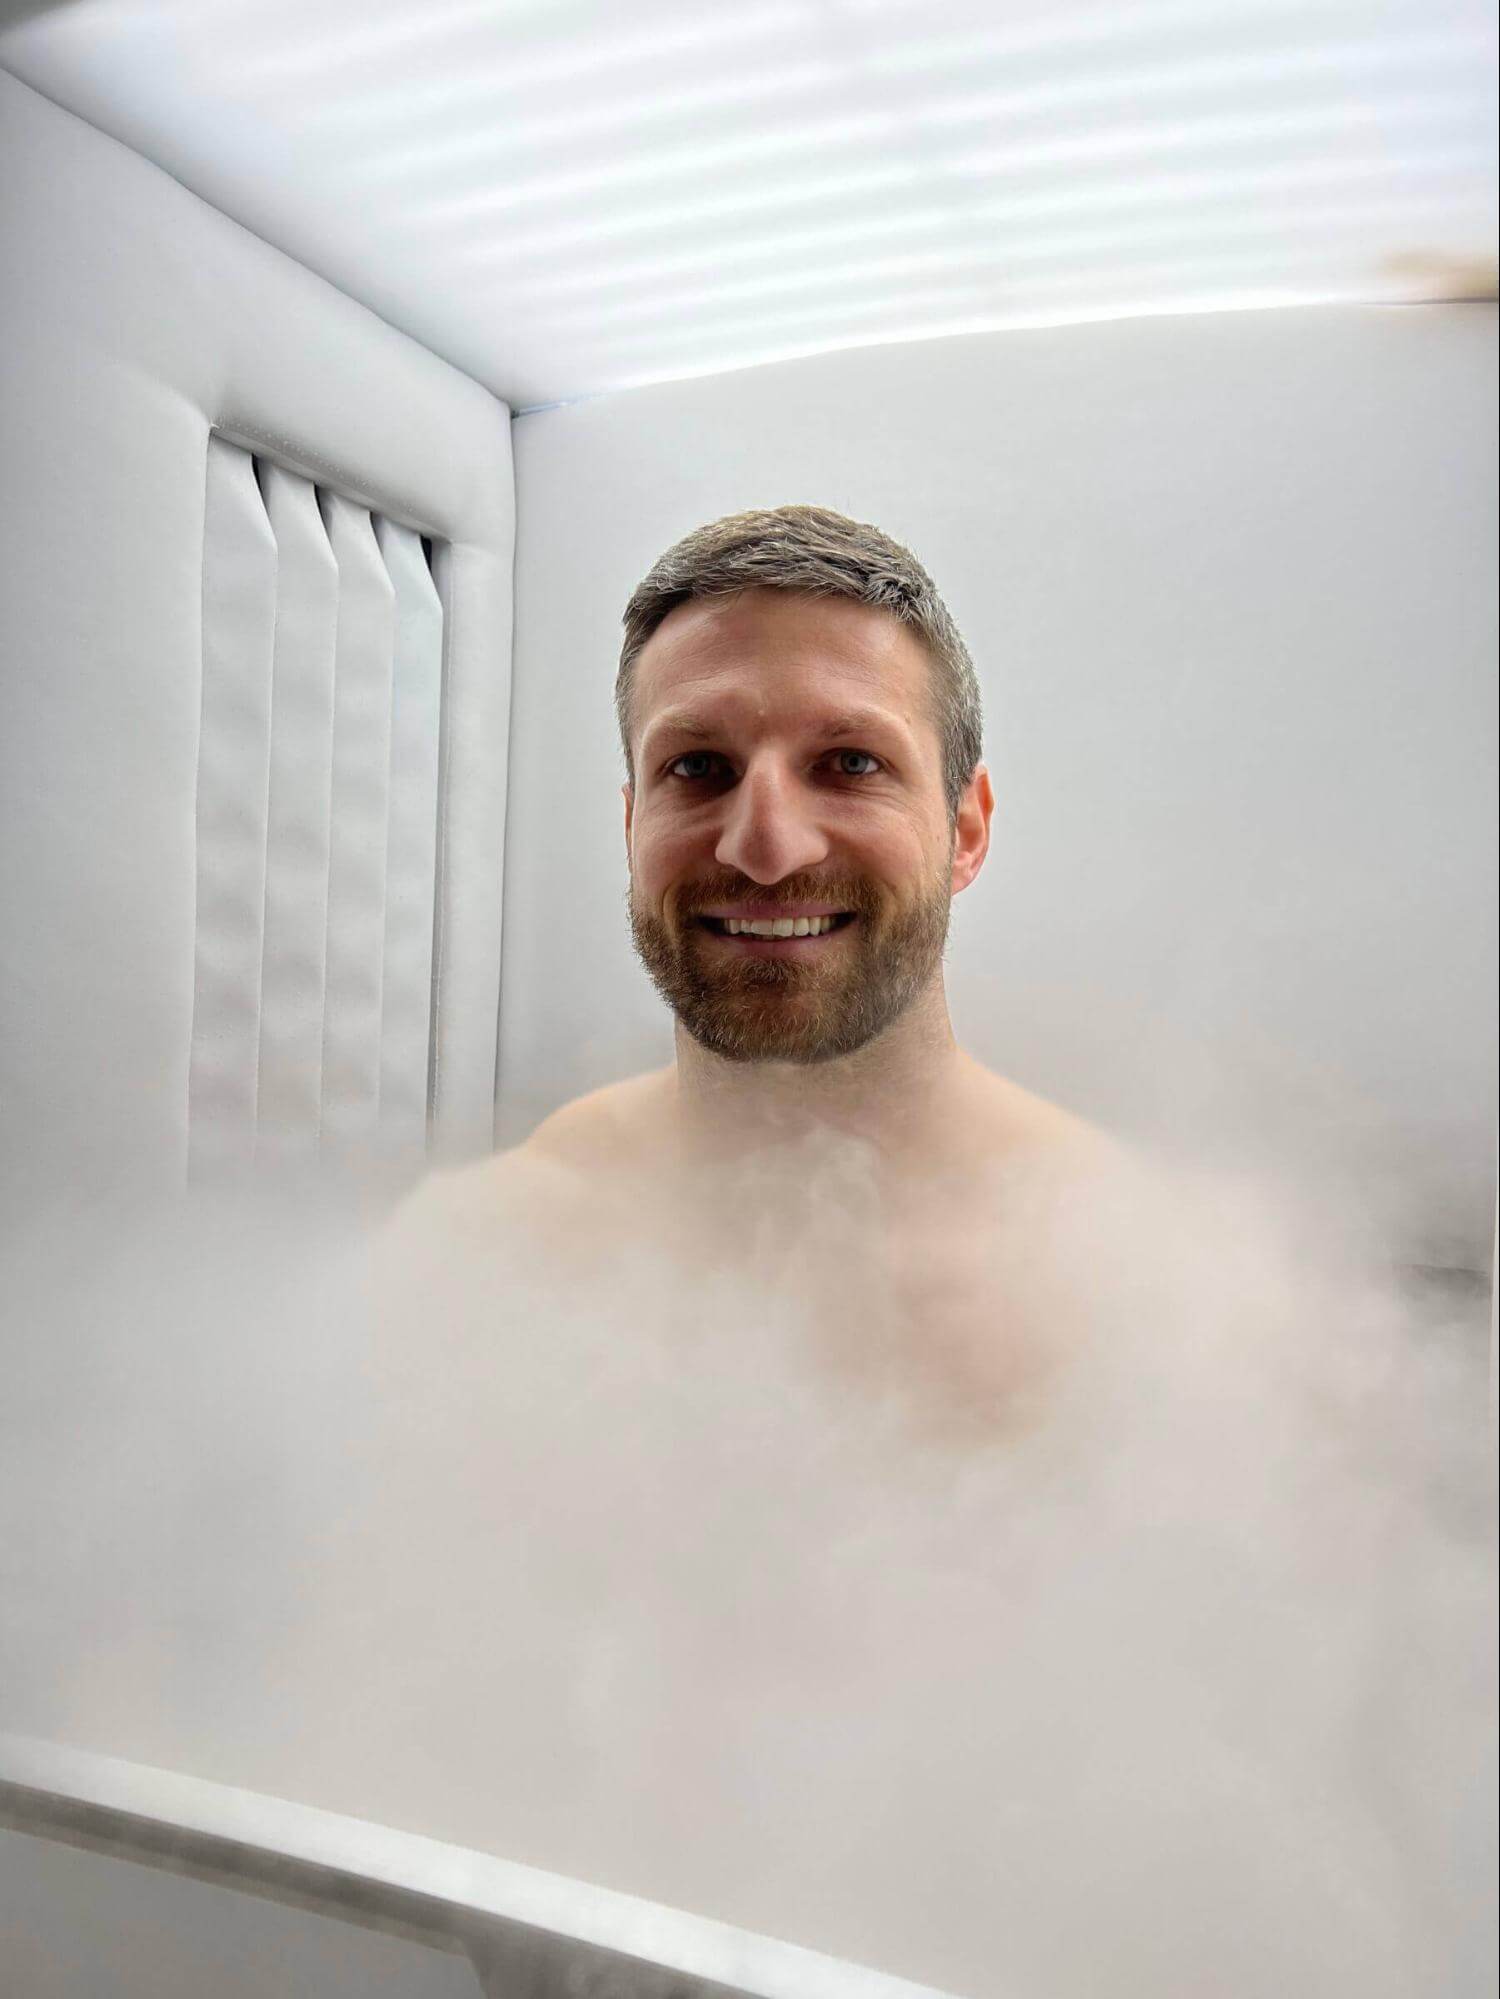 I tried cryotherapy twice to find out how it compares to cold plunging.